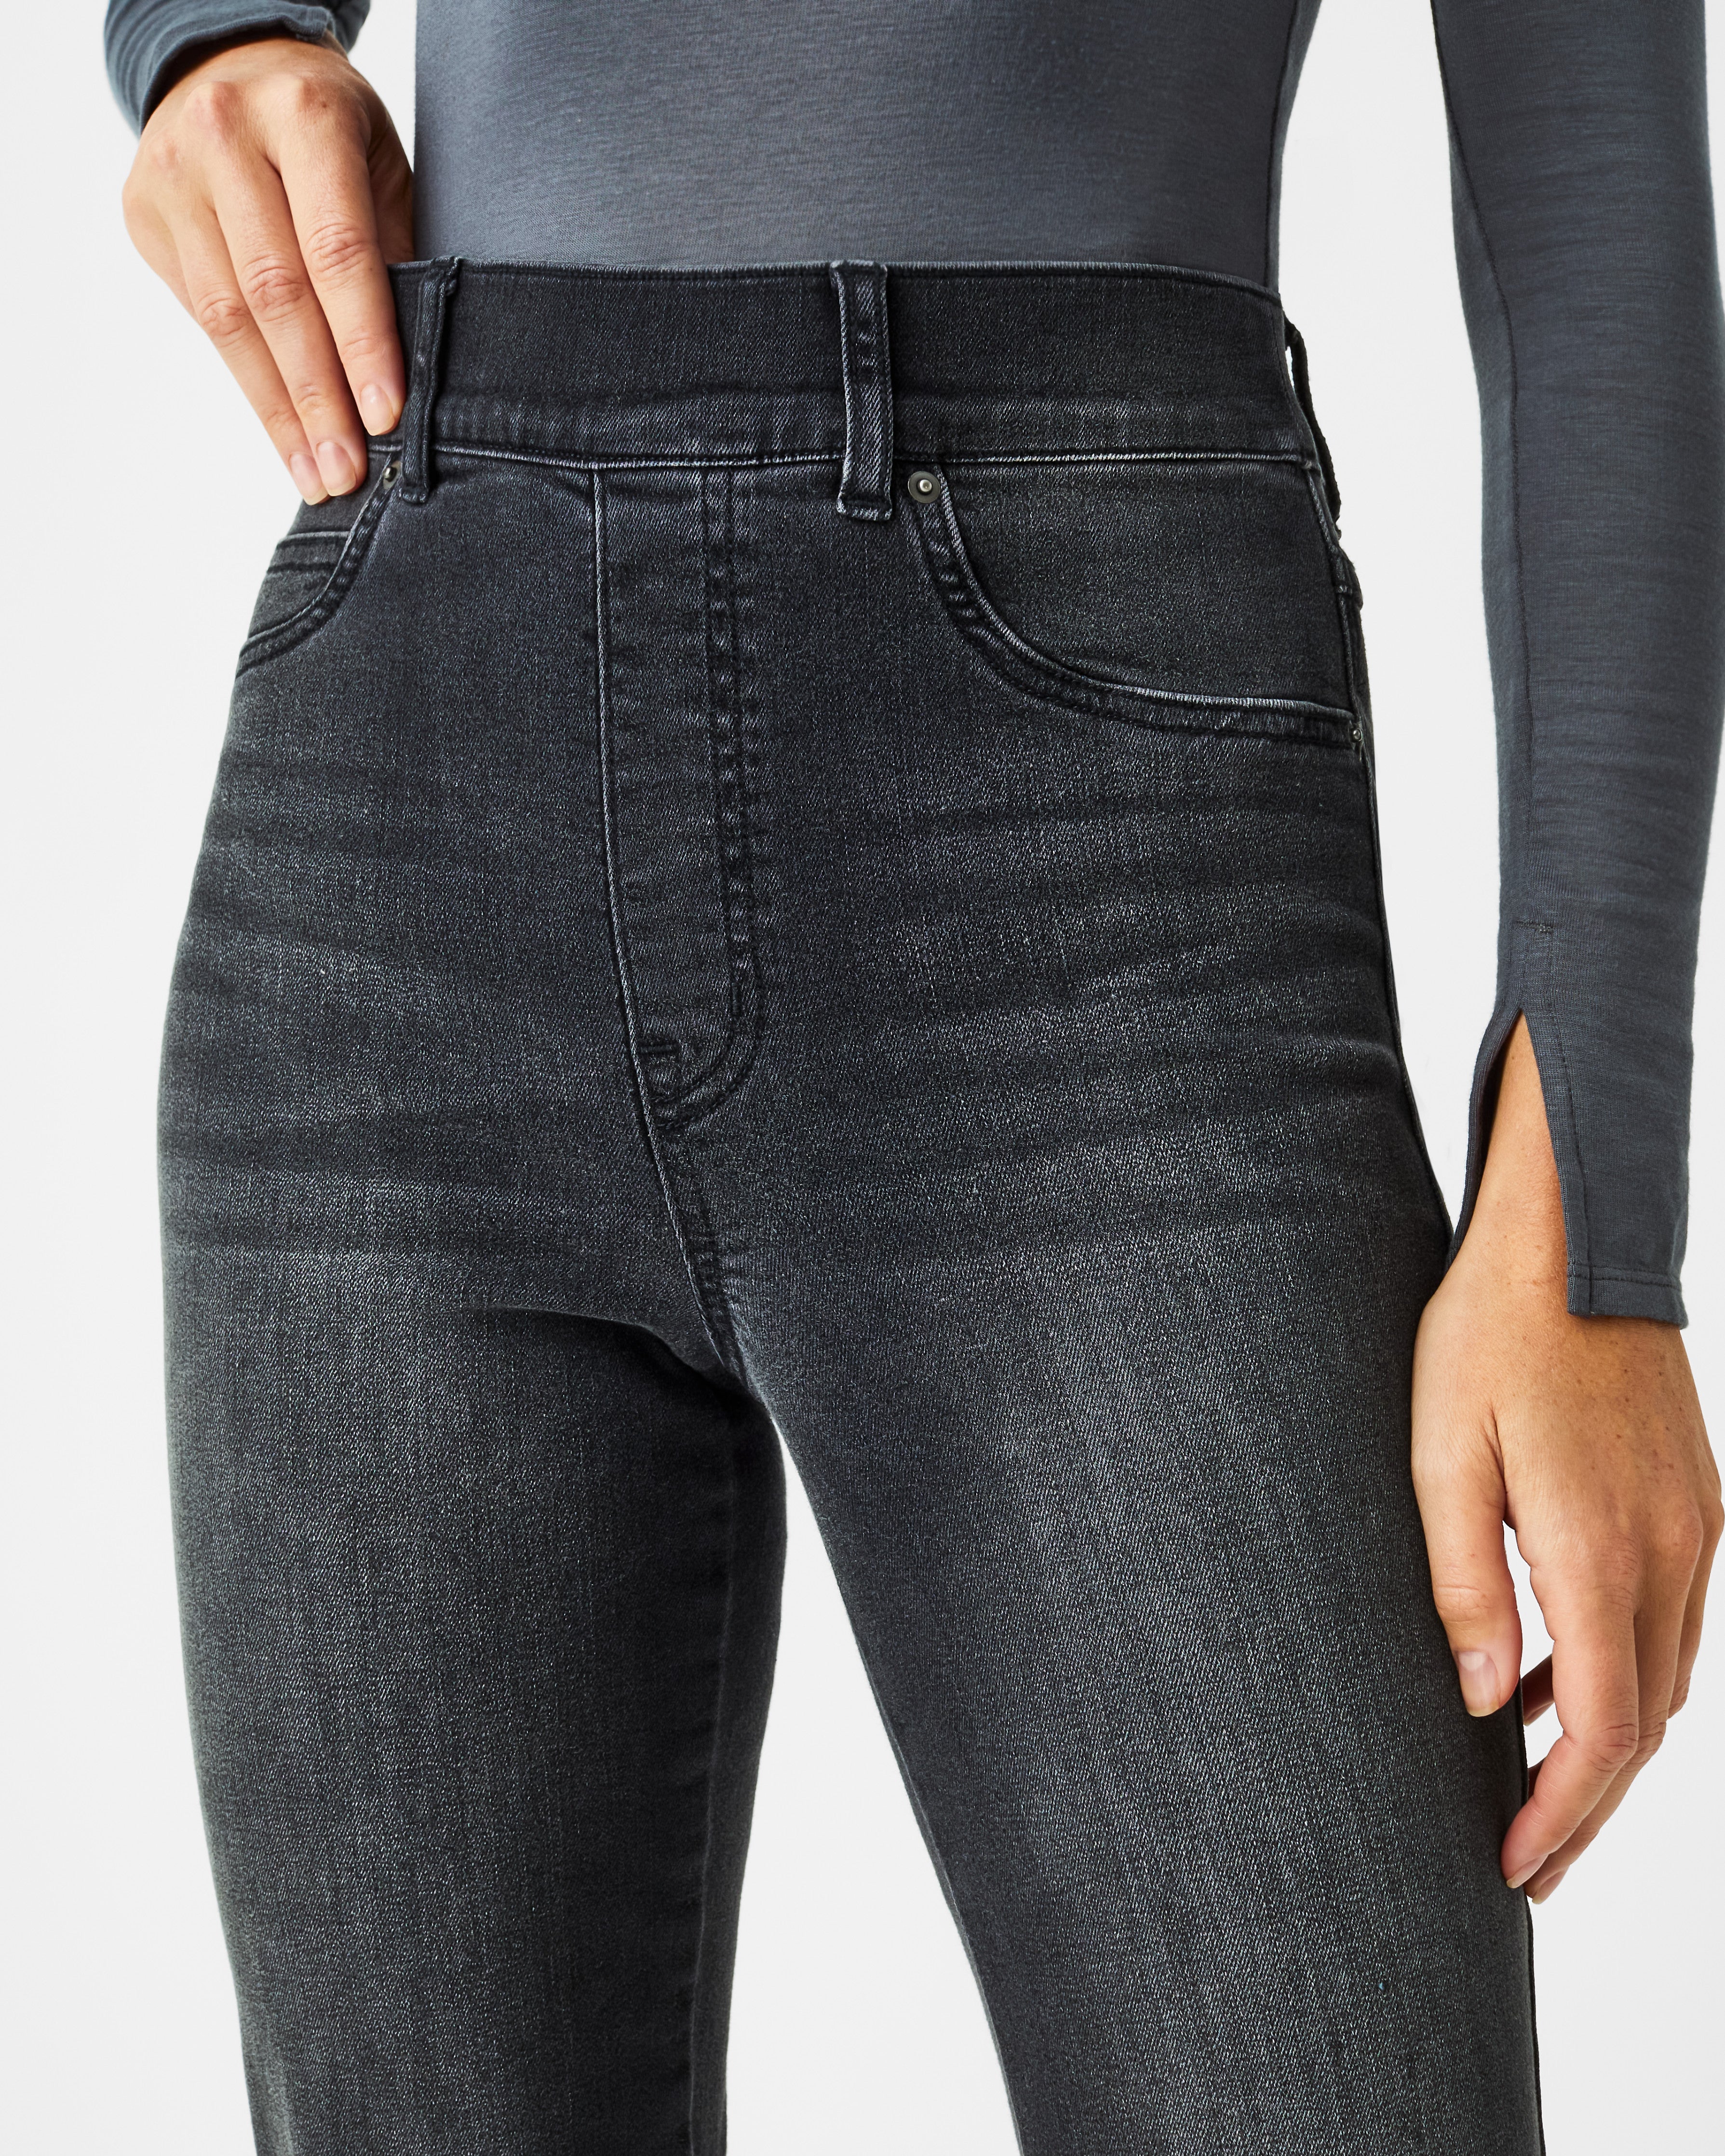 Spanx jeans are slim on results